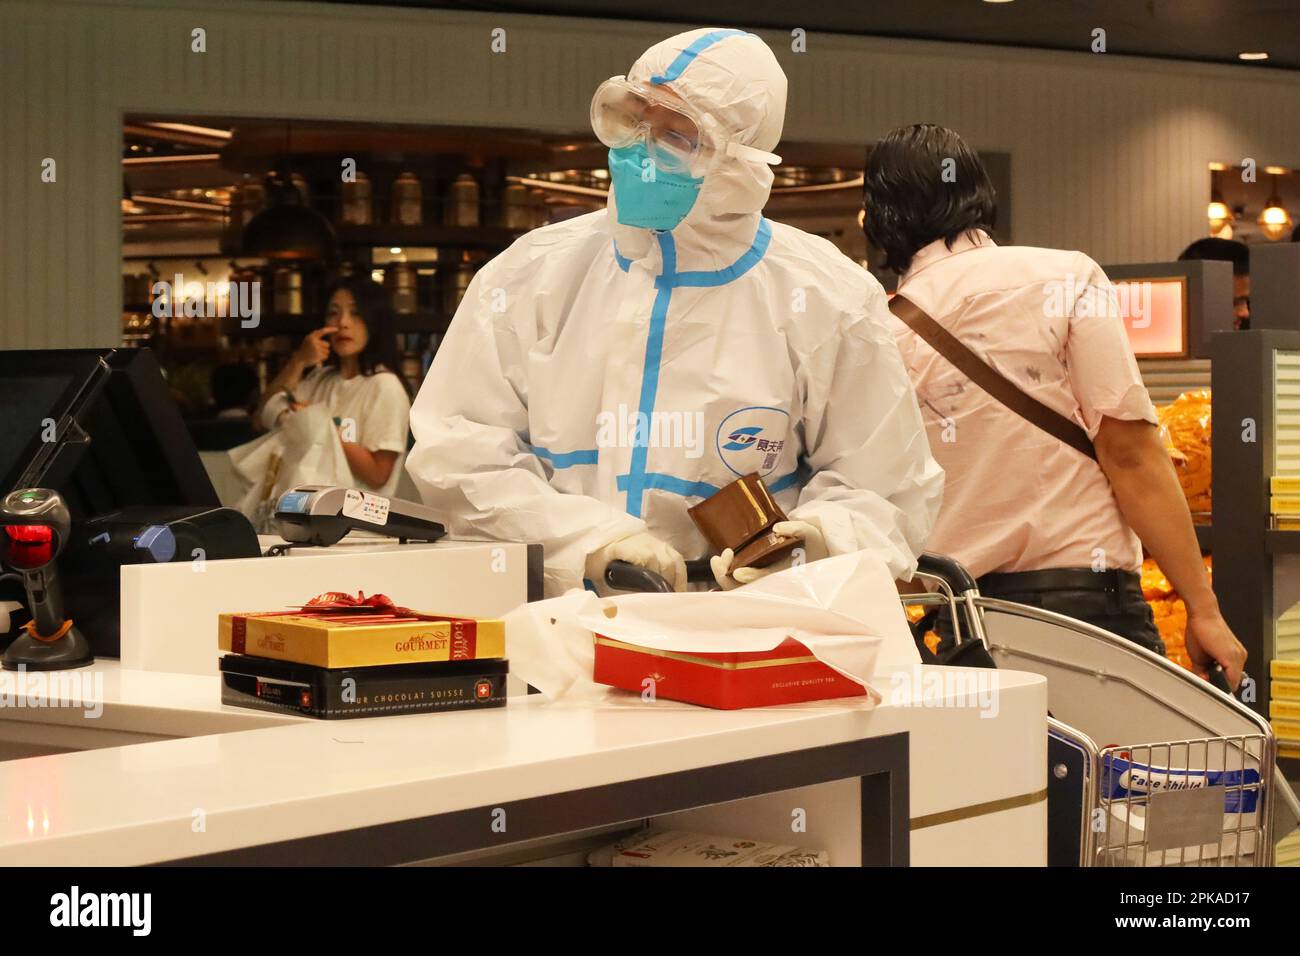 25.02.2023, Qatar, , Doha - Man shopping in full protection at the Hamad International Airport duty free terminal. 00S230225D364CAROEX.JPG [MODEL RELE Stock Photo